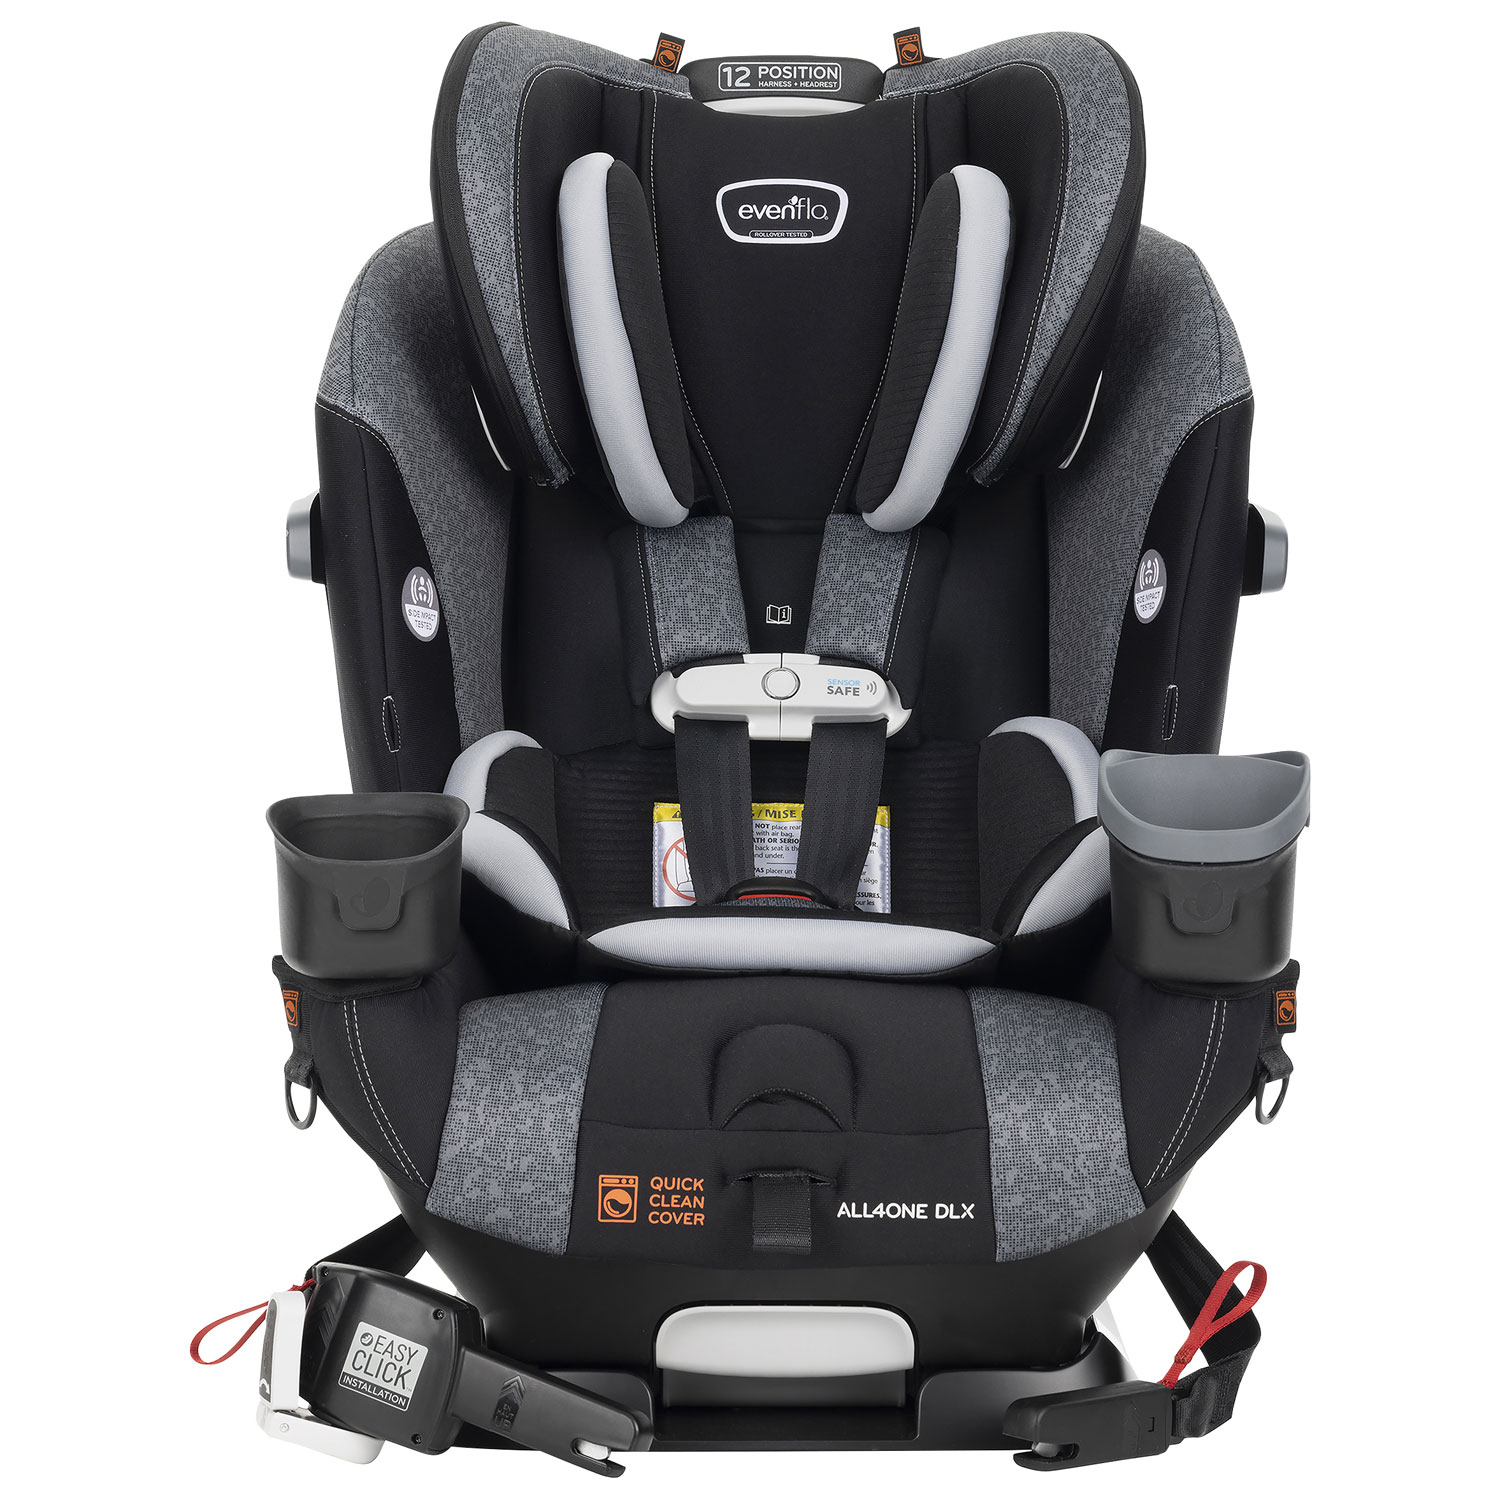 Evenflo All4One DLX All-in-One Booster Car Seat with Sensor Safe - Latitude Grey